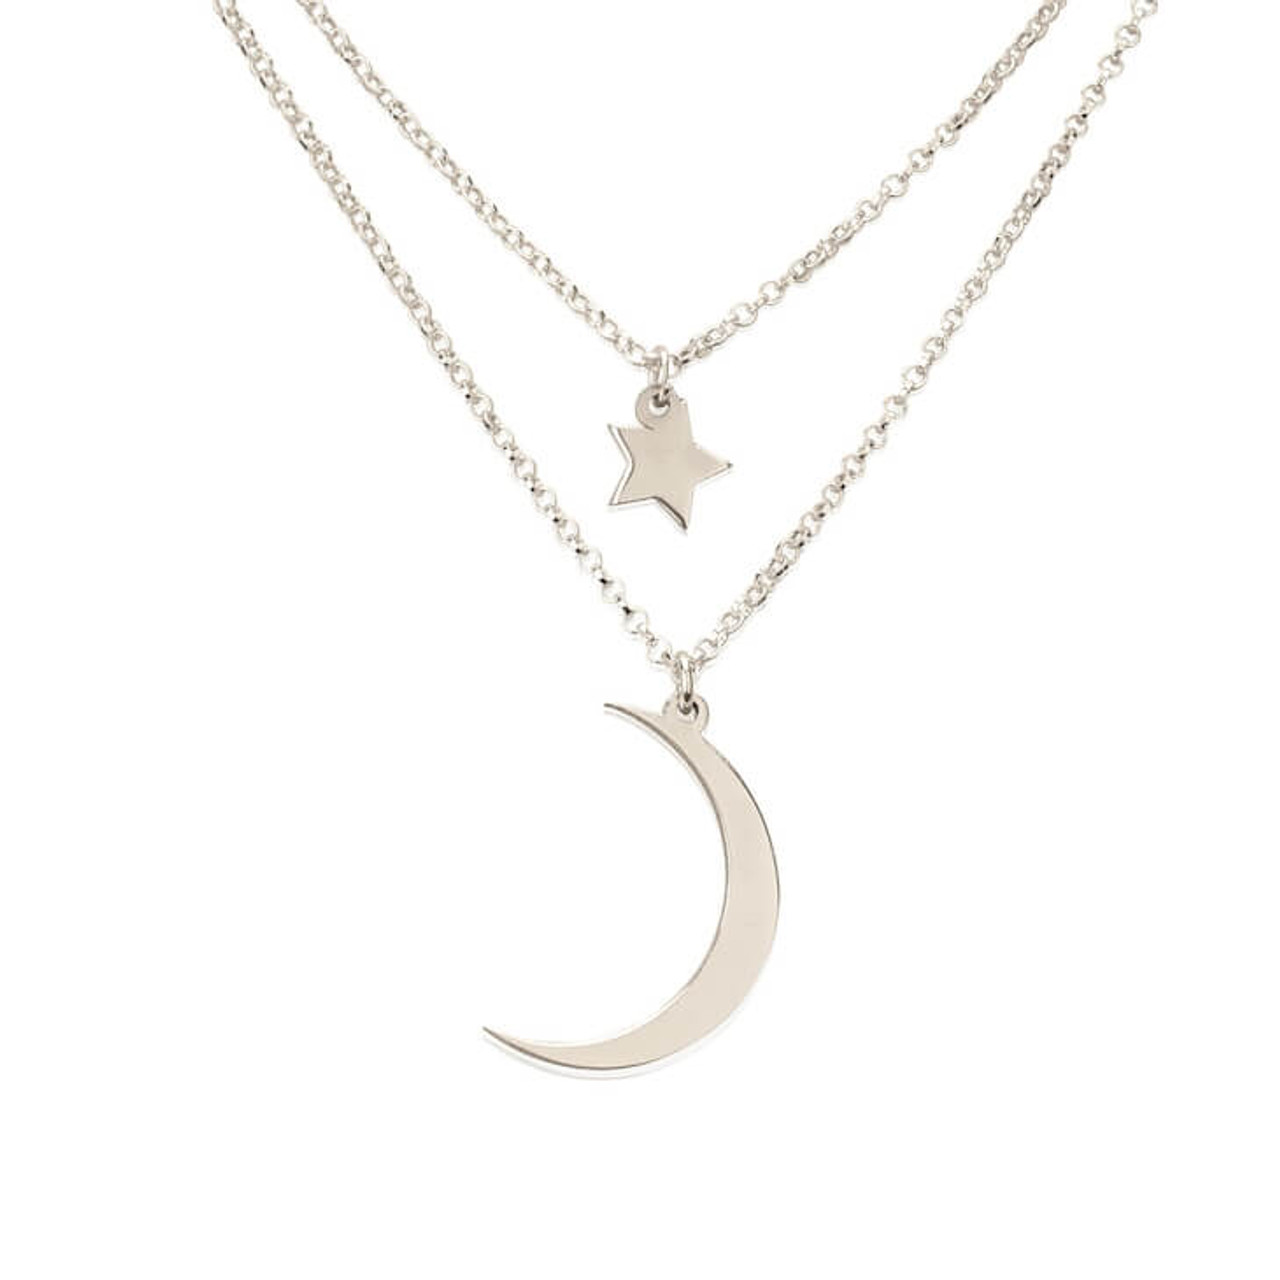 Morebrave Boho Layering Necklace Chain Gold Moon and Star Pendant Necklaces  Jewelry for Women and Girls : Amazon.in: Jewellery